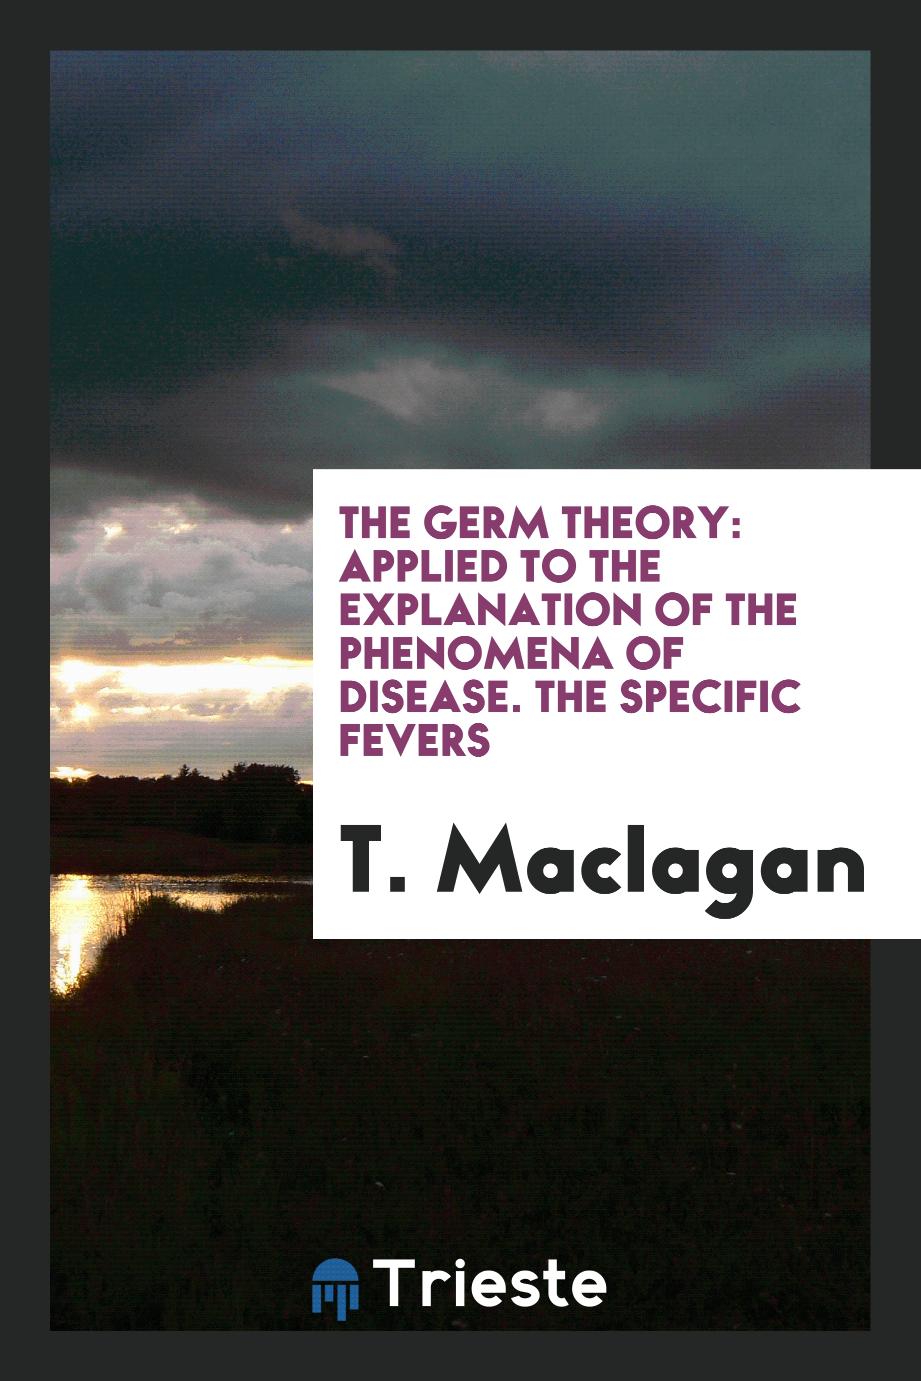 The Germ Theory: Applied to the Explanation of the Phenomena of Disease. The Specific Fevers